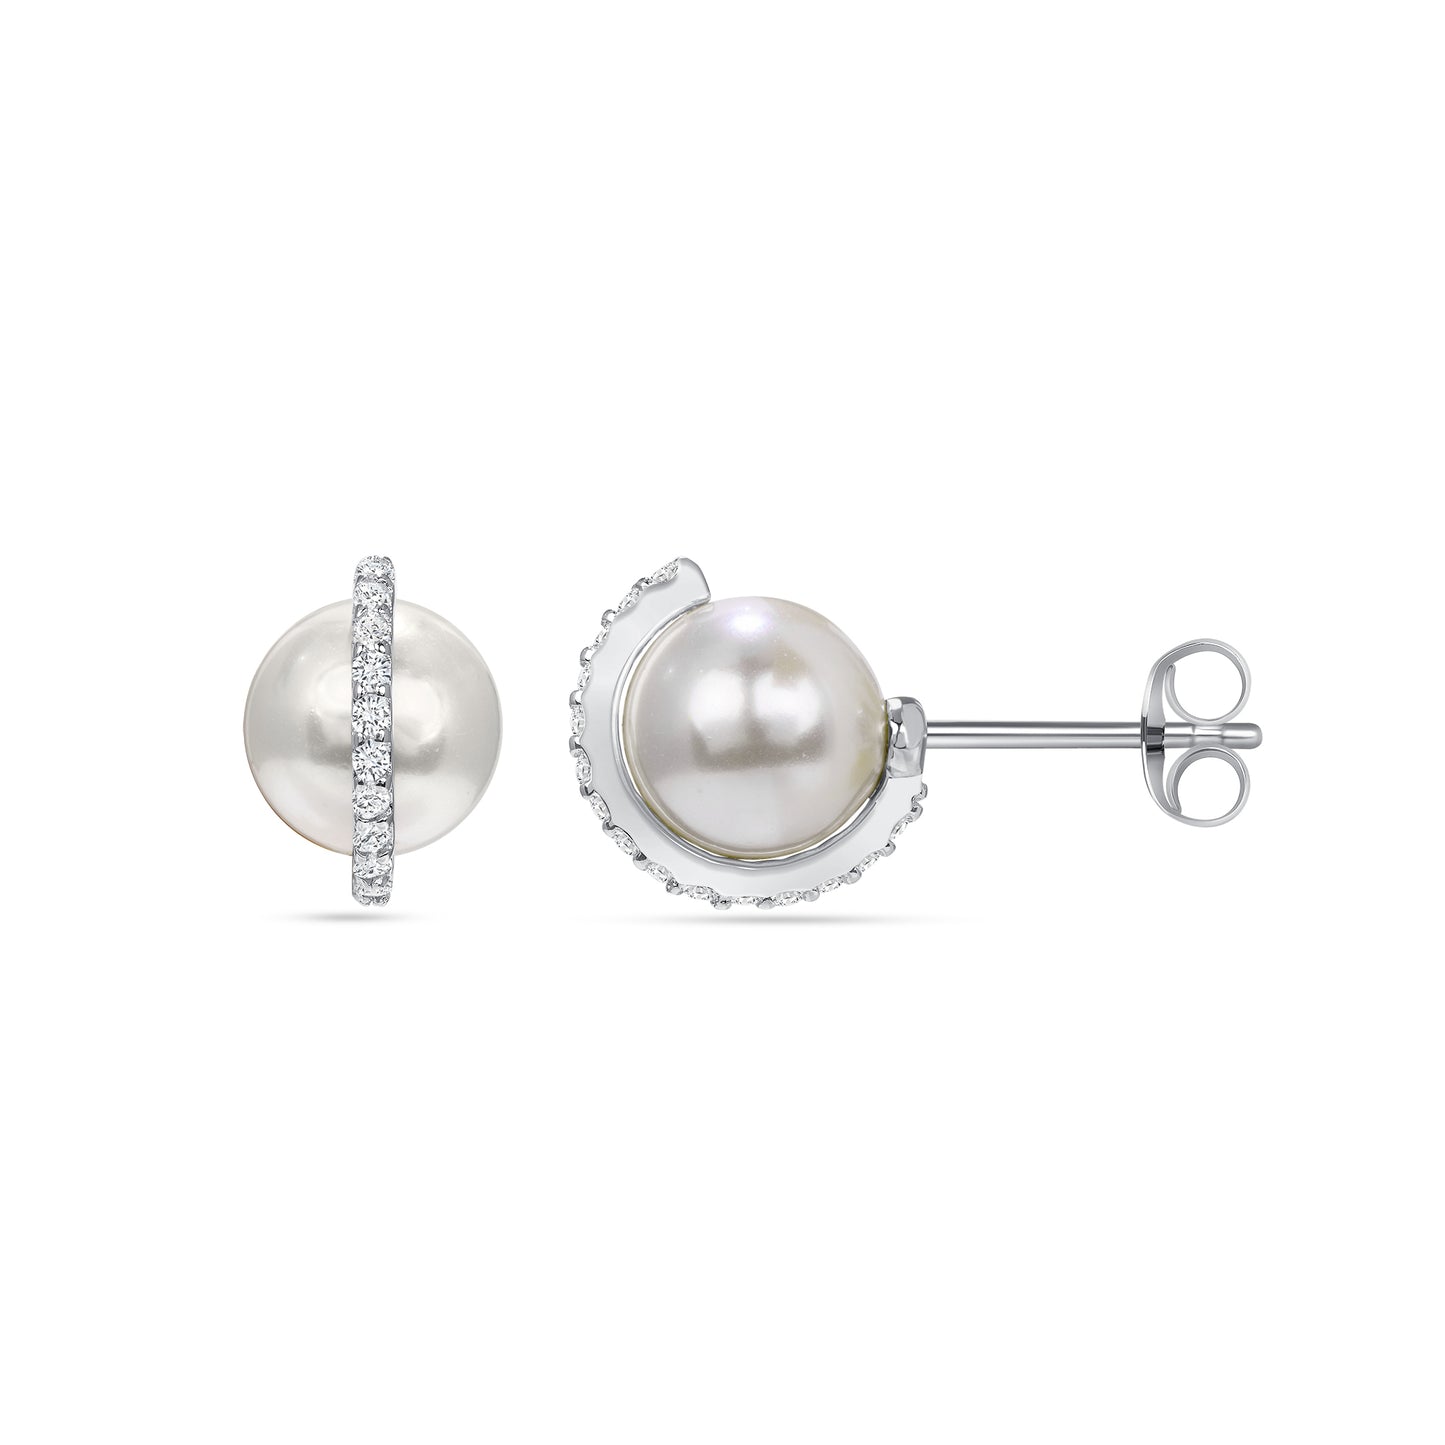 Silver 925 Rhodium Plated White Shell Pearl Cubic Zirconia Earrings. DGE2092